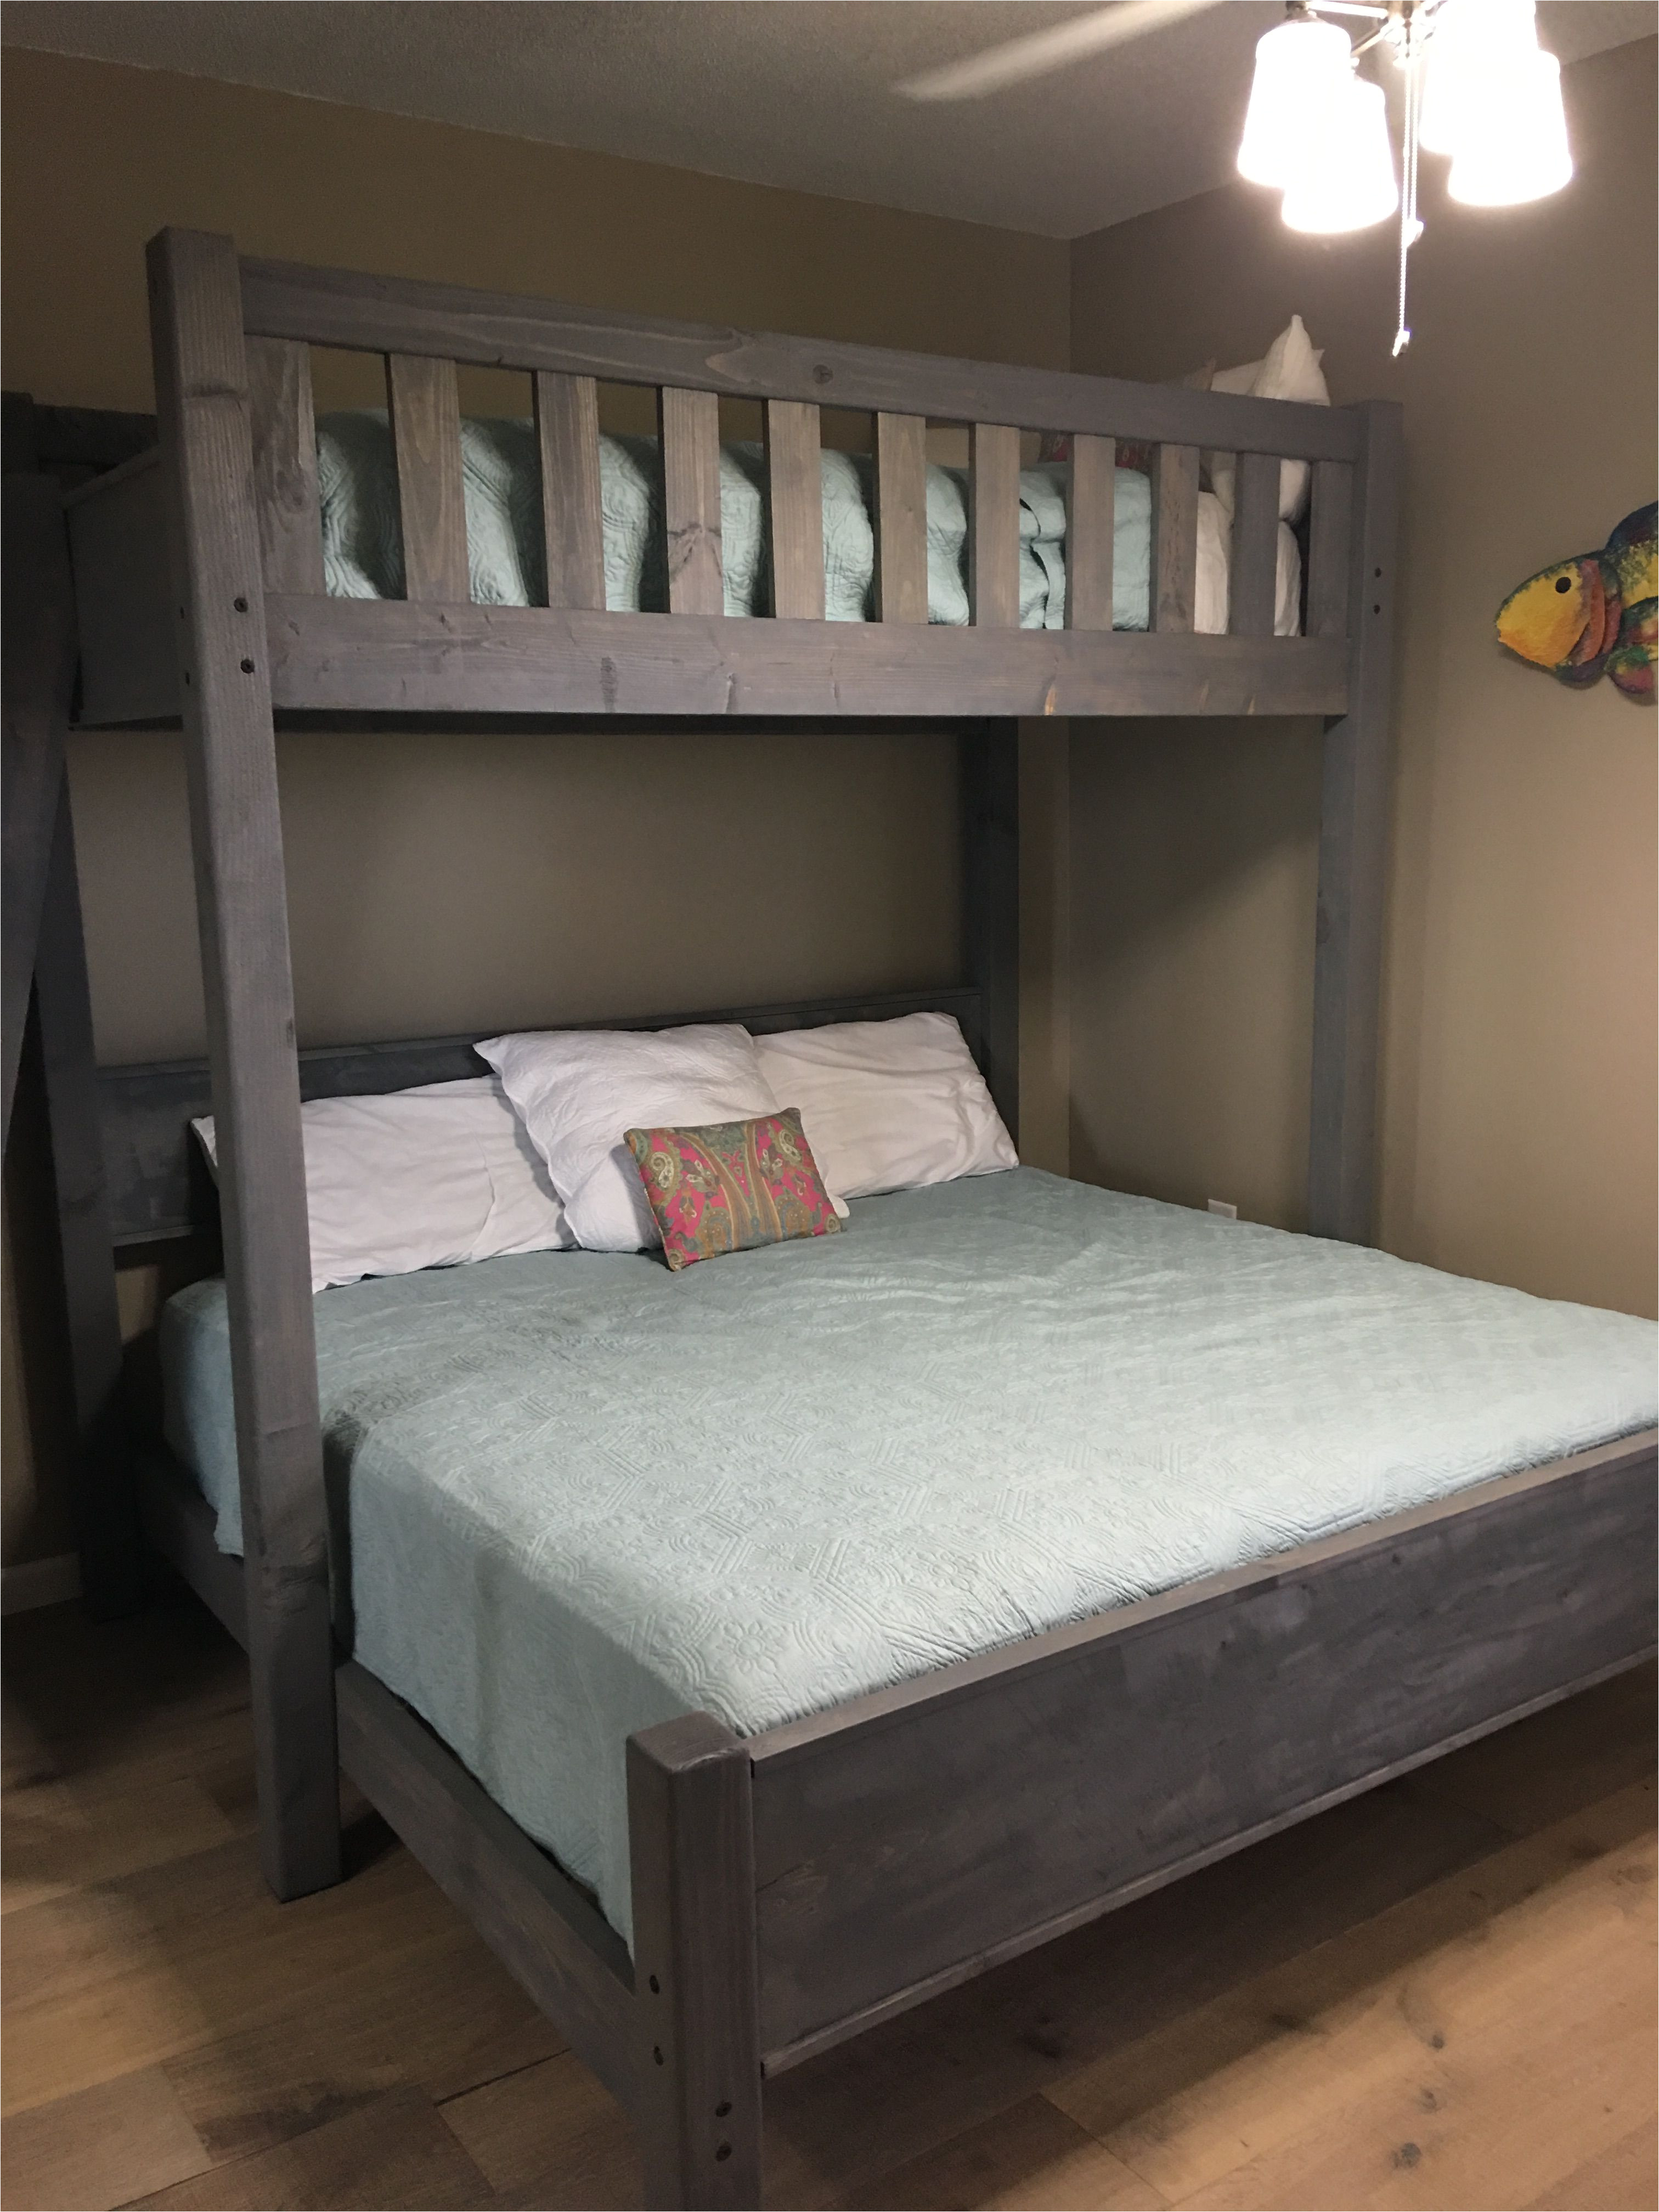 custom bunk bed in twin over king or twin over queen at parkcitybunkbeds com